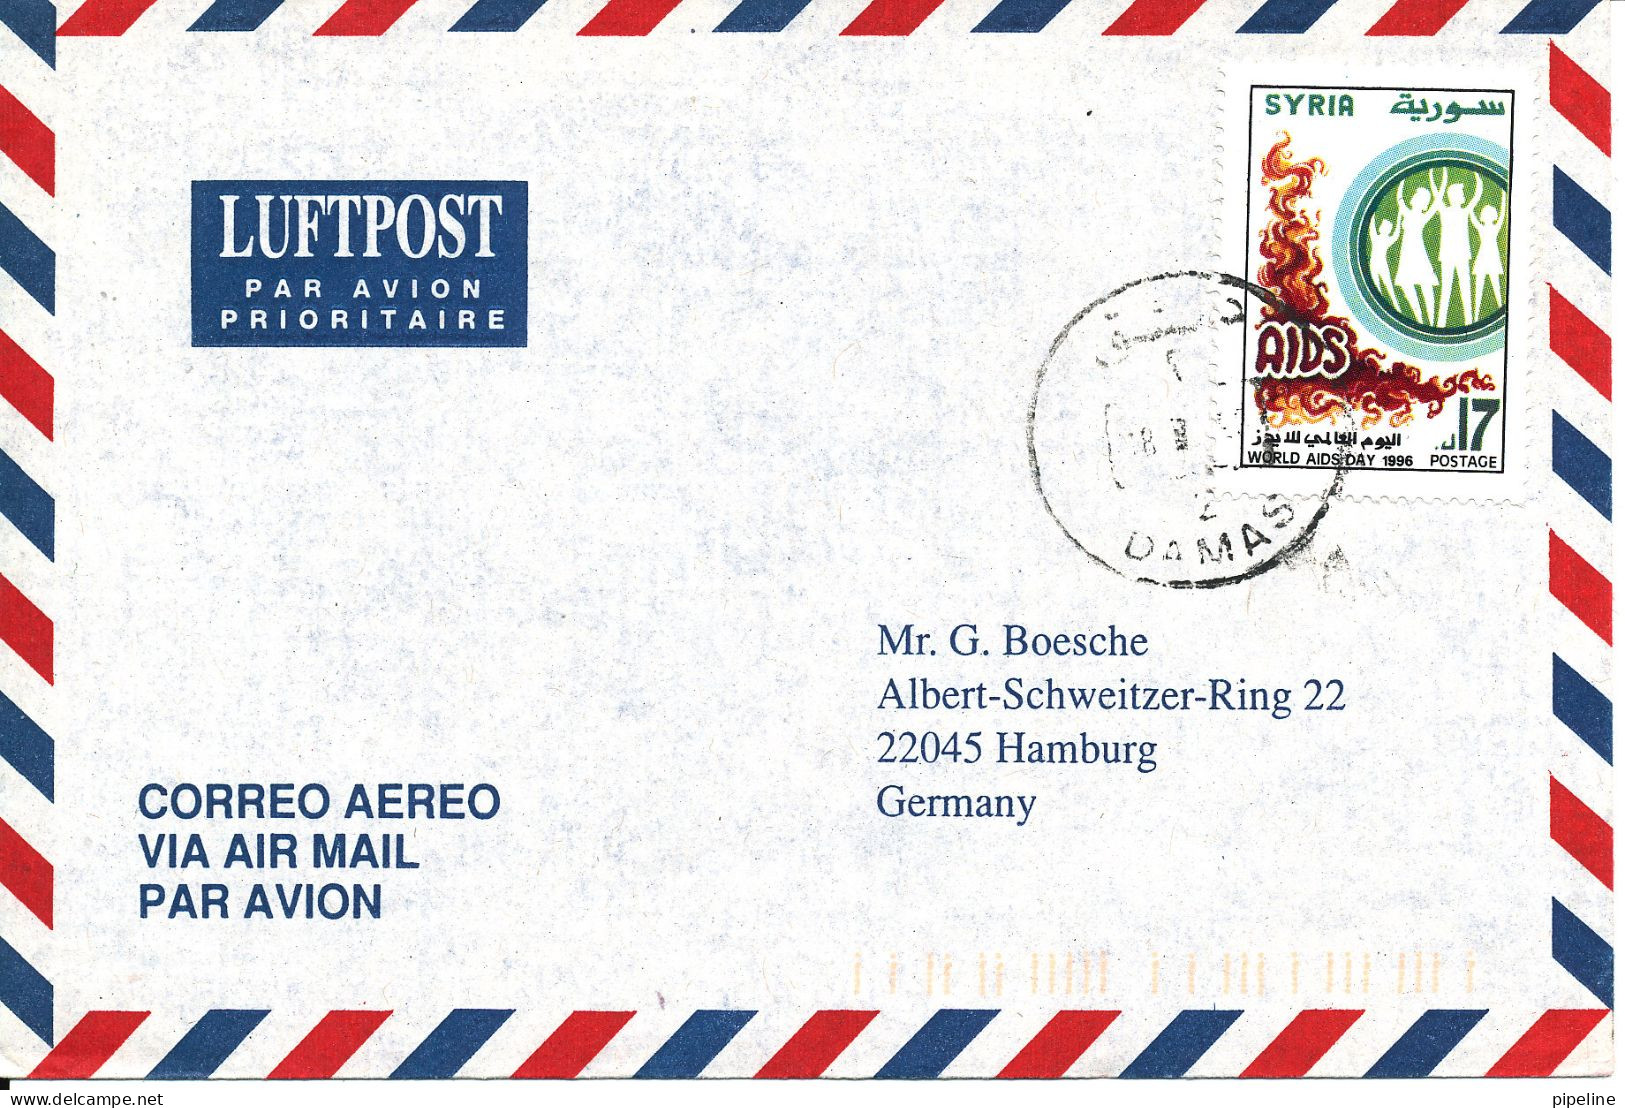 Syria Air Mail Cover Sent To Germany Single Franked AIDS - Syria